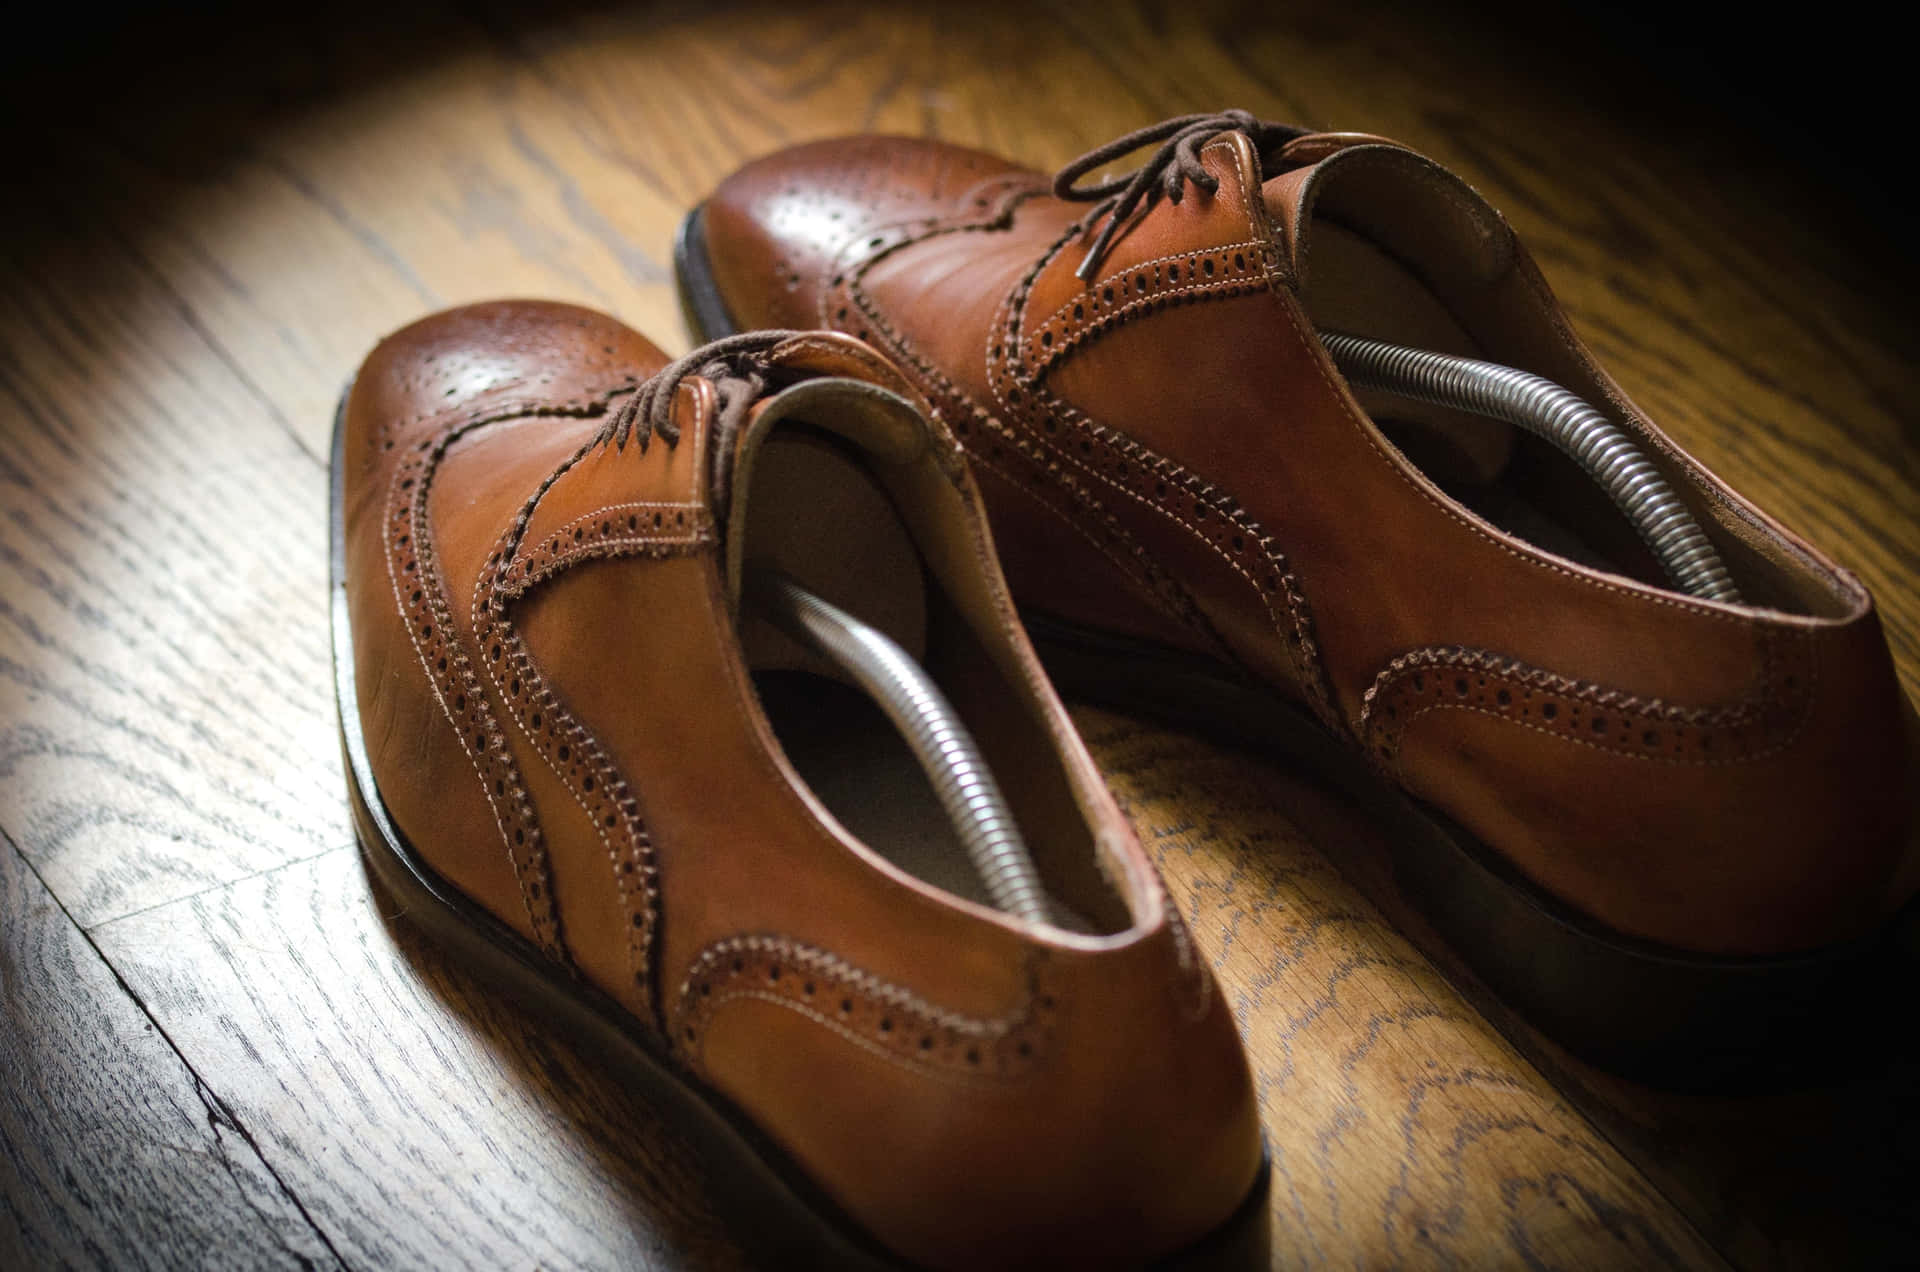 A Pair Of Brown Shoes On A Wooden Floor